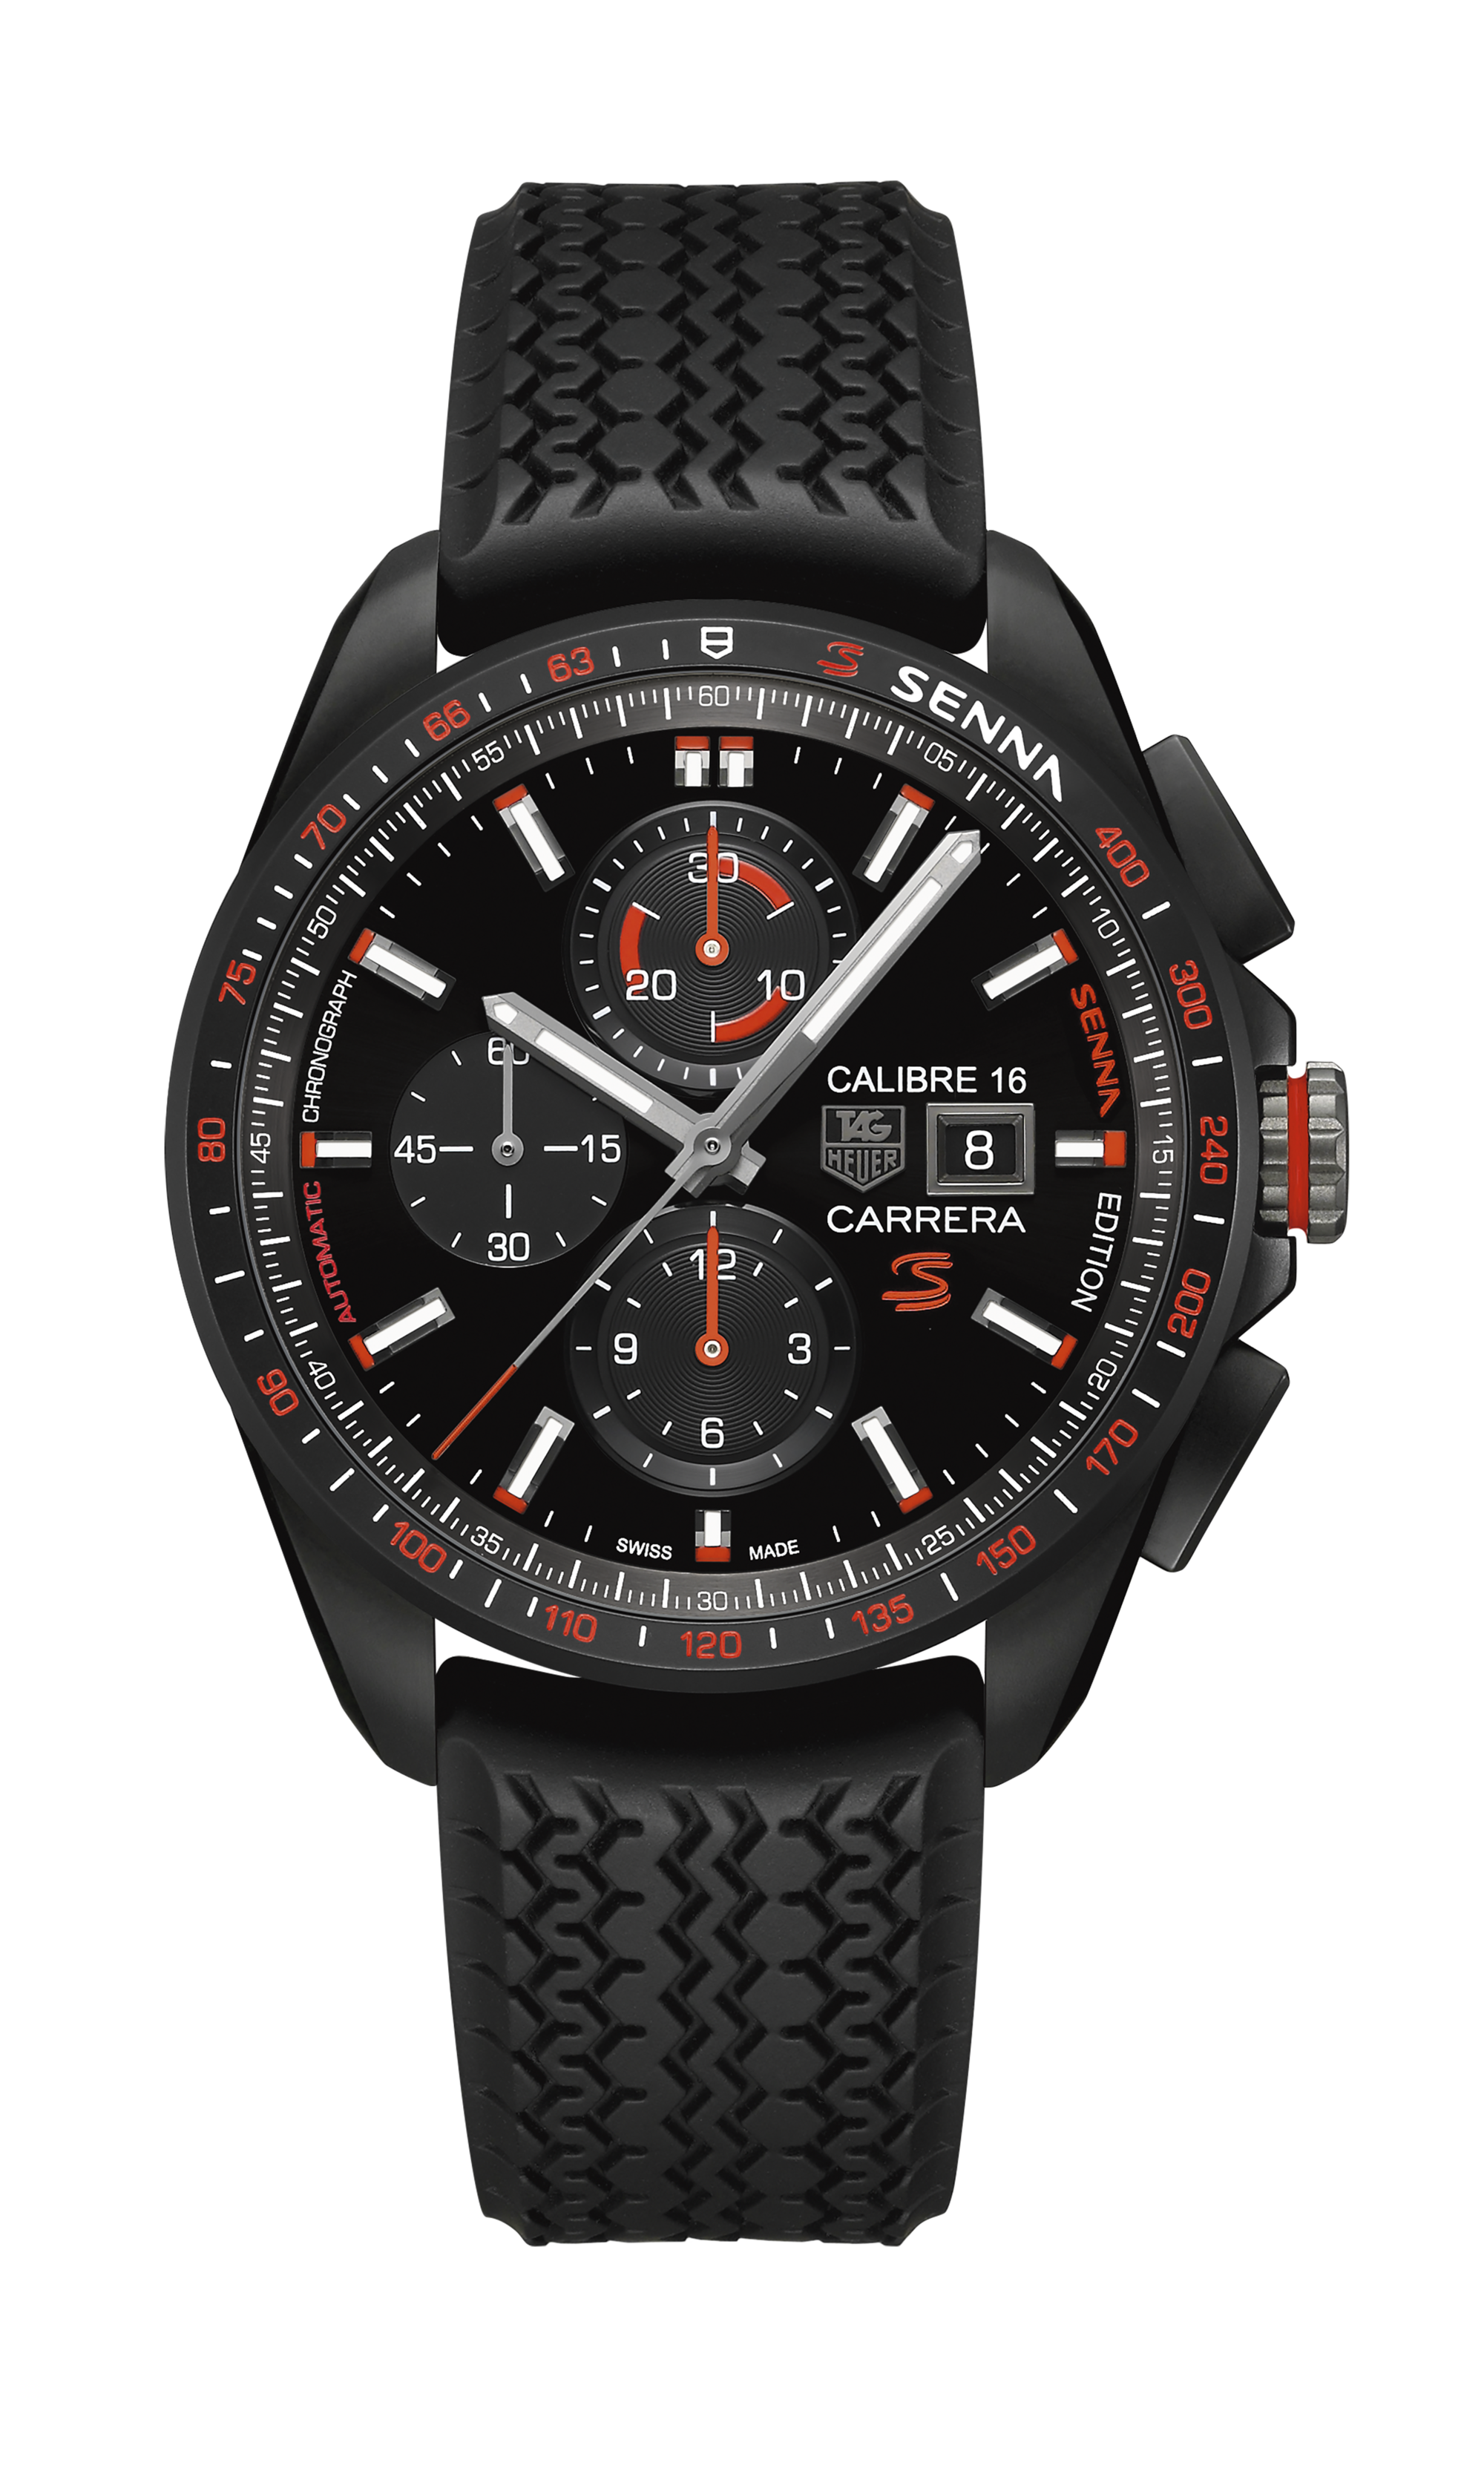 Tag Heuer Carrera Calibre 16 Price Los Angeles - video Dailymotion